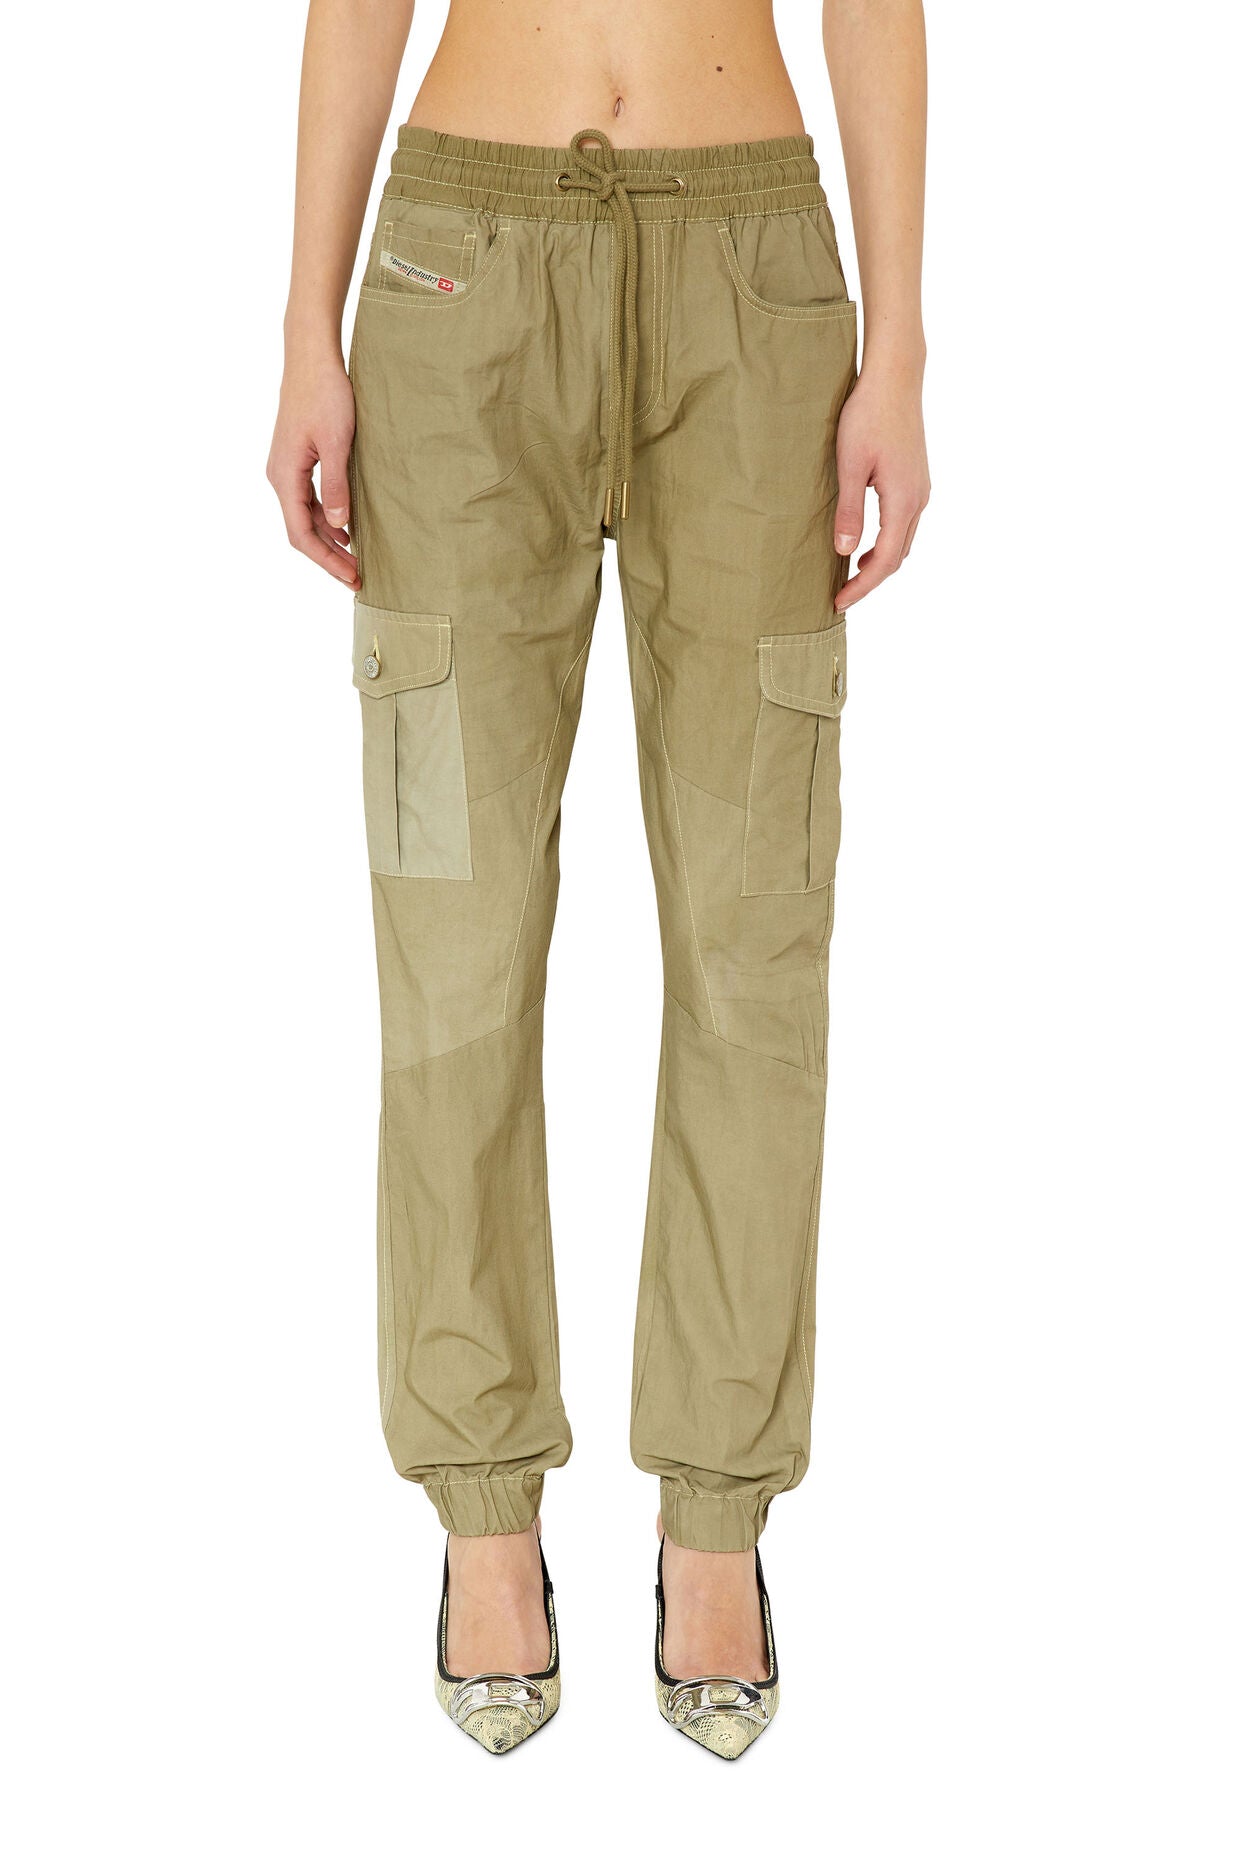 Diesel - P-Ursula-Chalk Trousers - Military Green